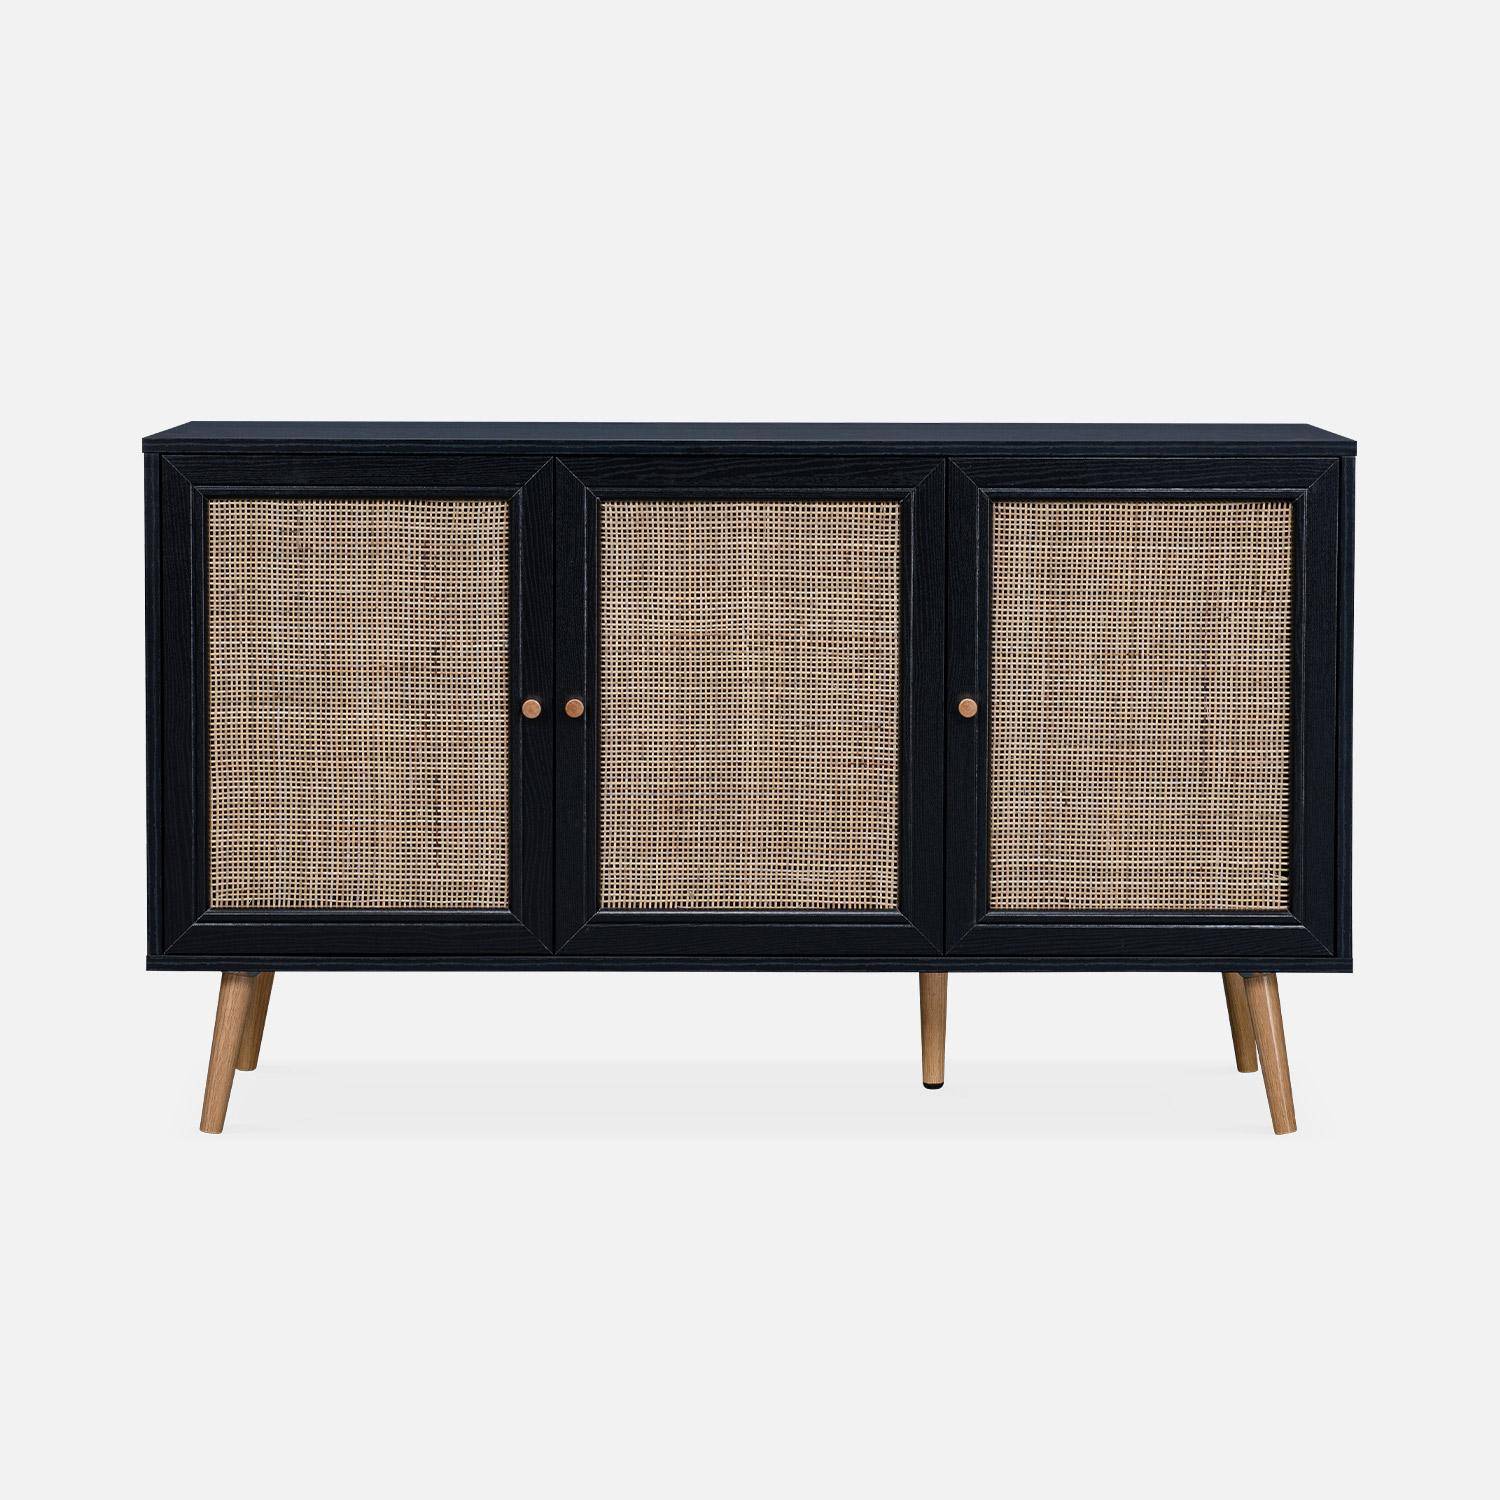 Wooden and cane rattan detail sideboard with 3 doors, 2 shelves, Scandi-style legs, 120x39x70cm - Boheme - Black Photo4